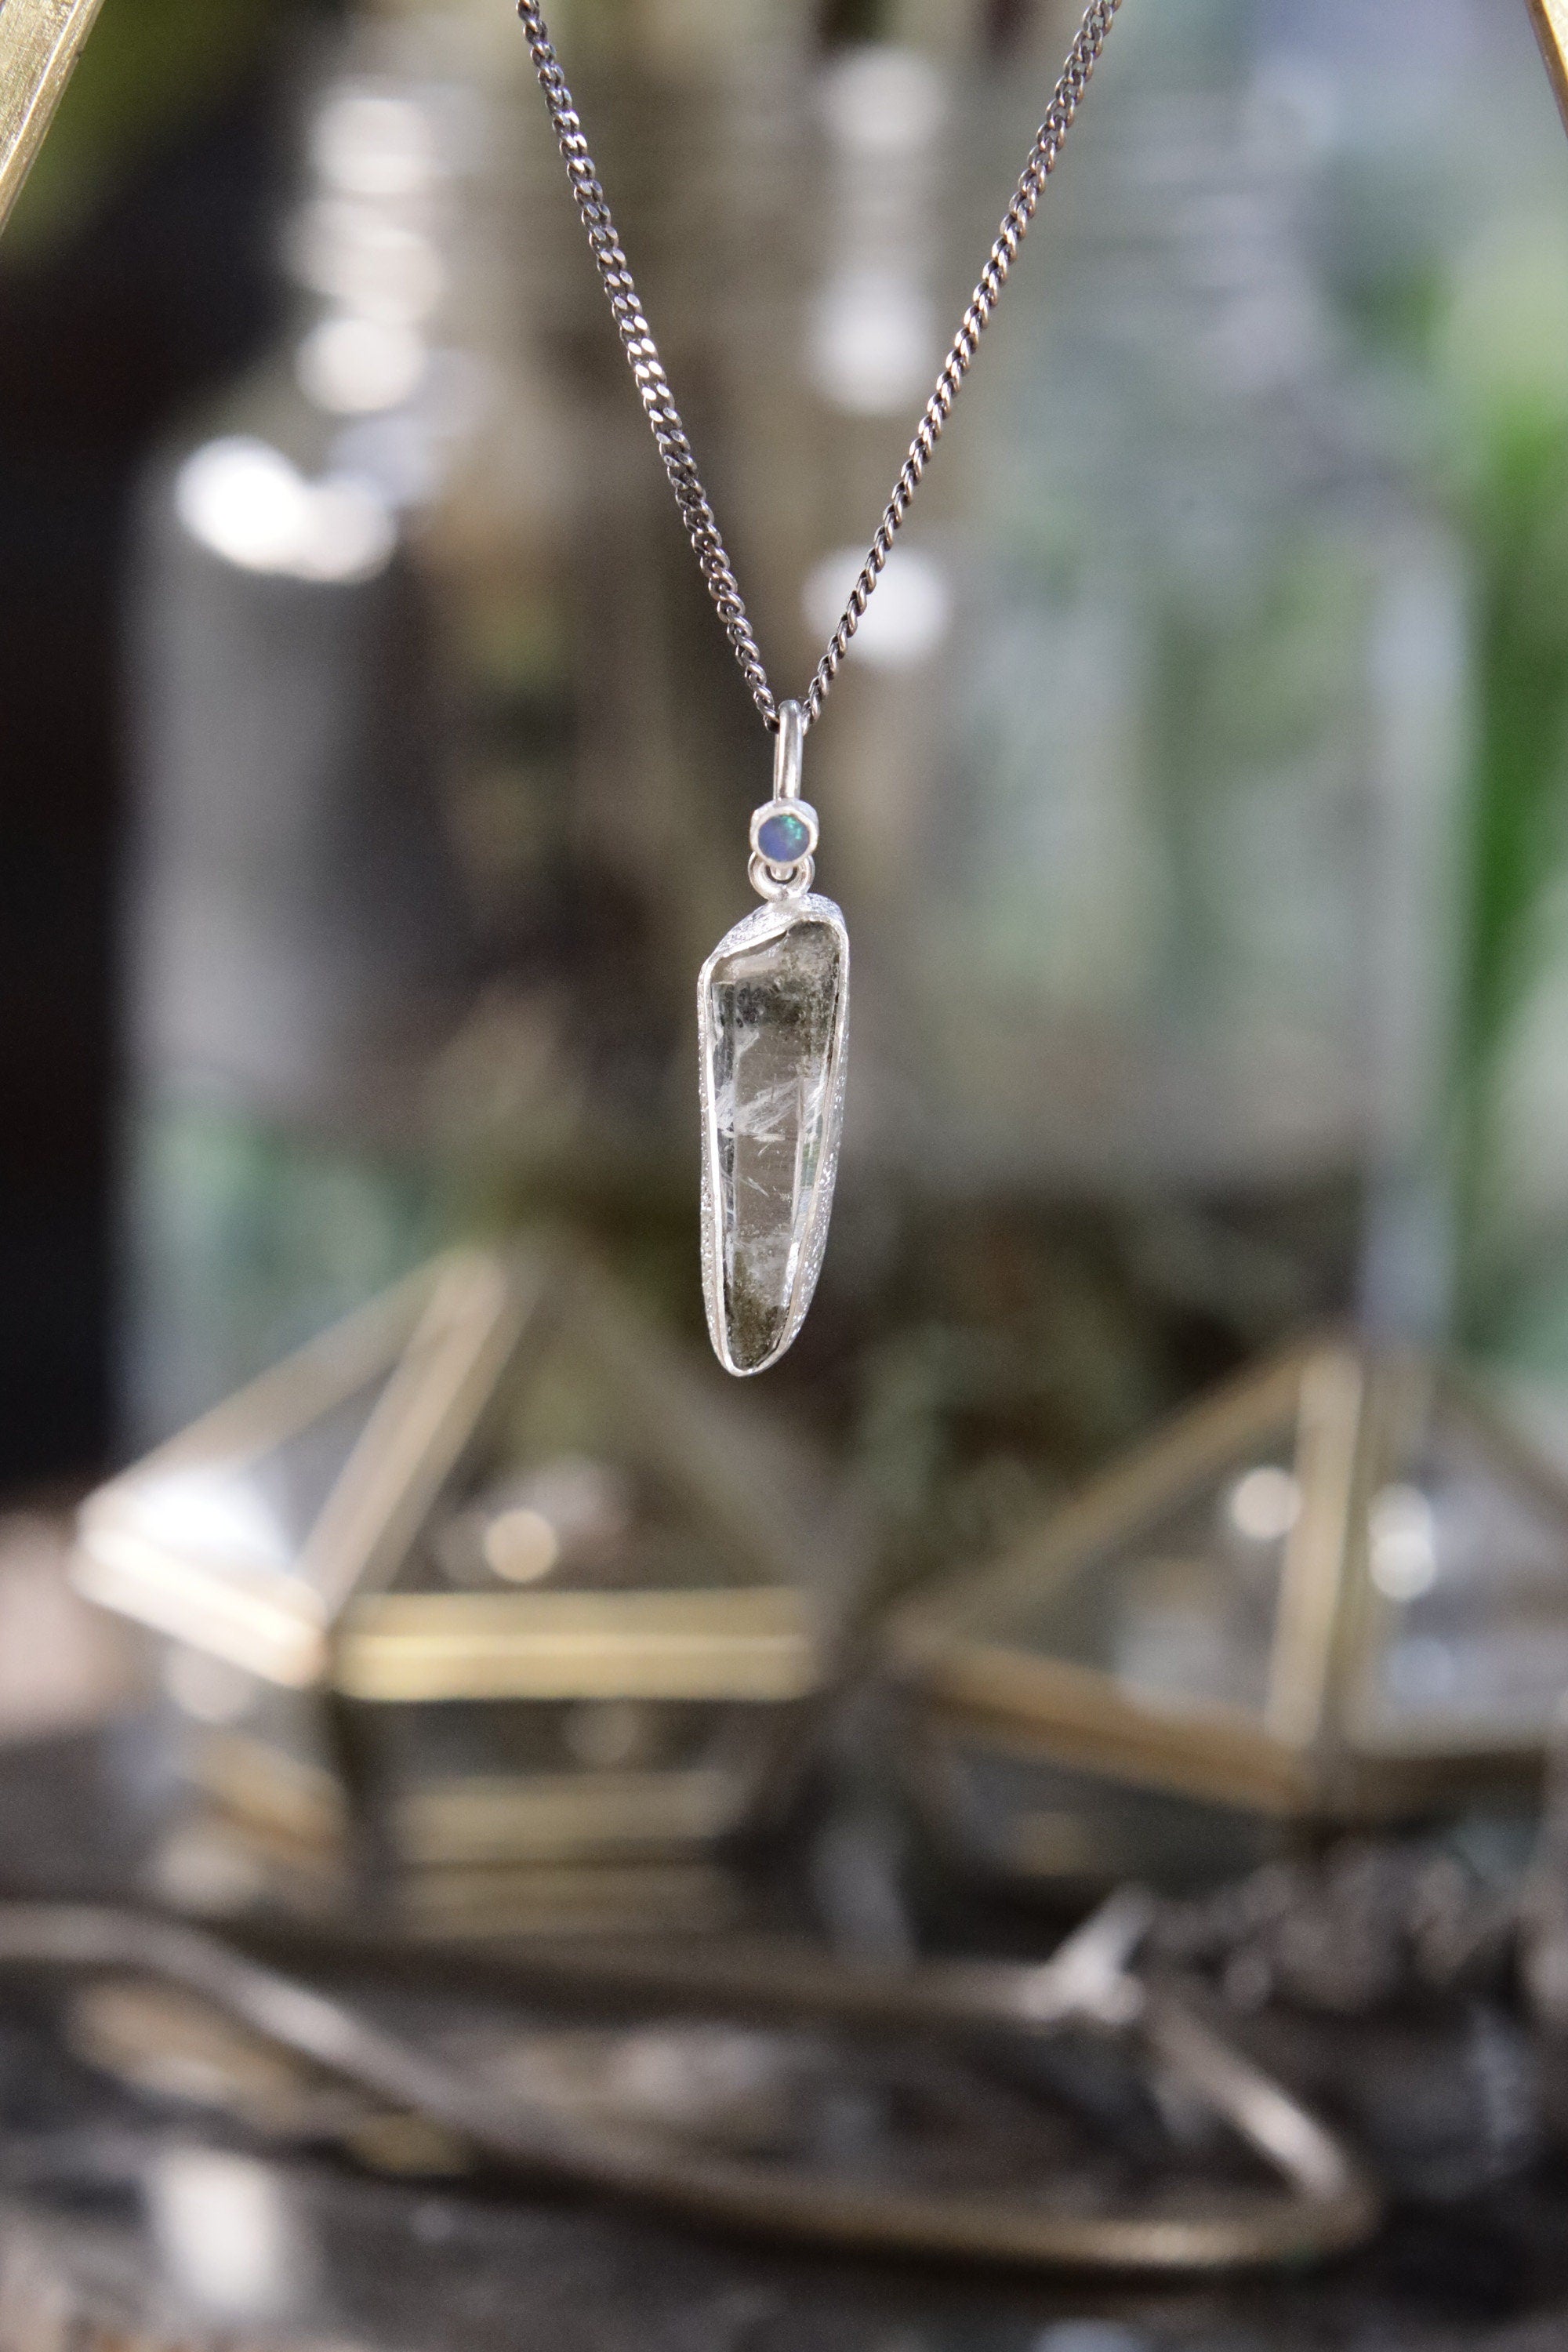 Sterling Silver Pendant with Himalayan Chlorite Quartz and Opal - High Shine & Sand Textured - NO/08